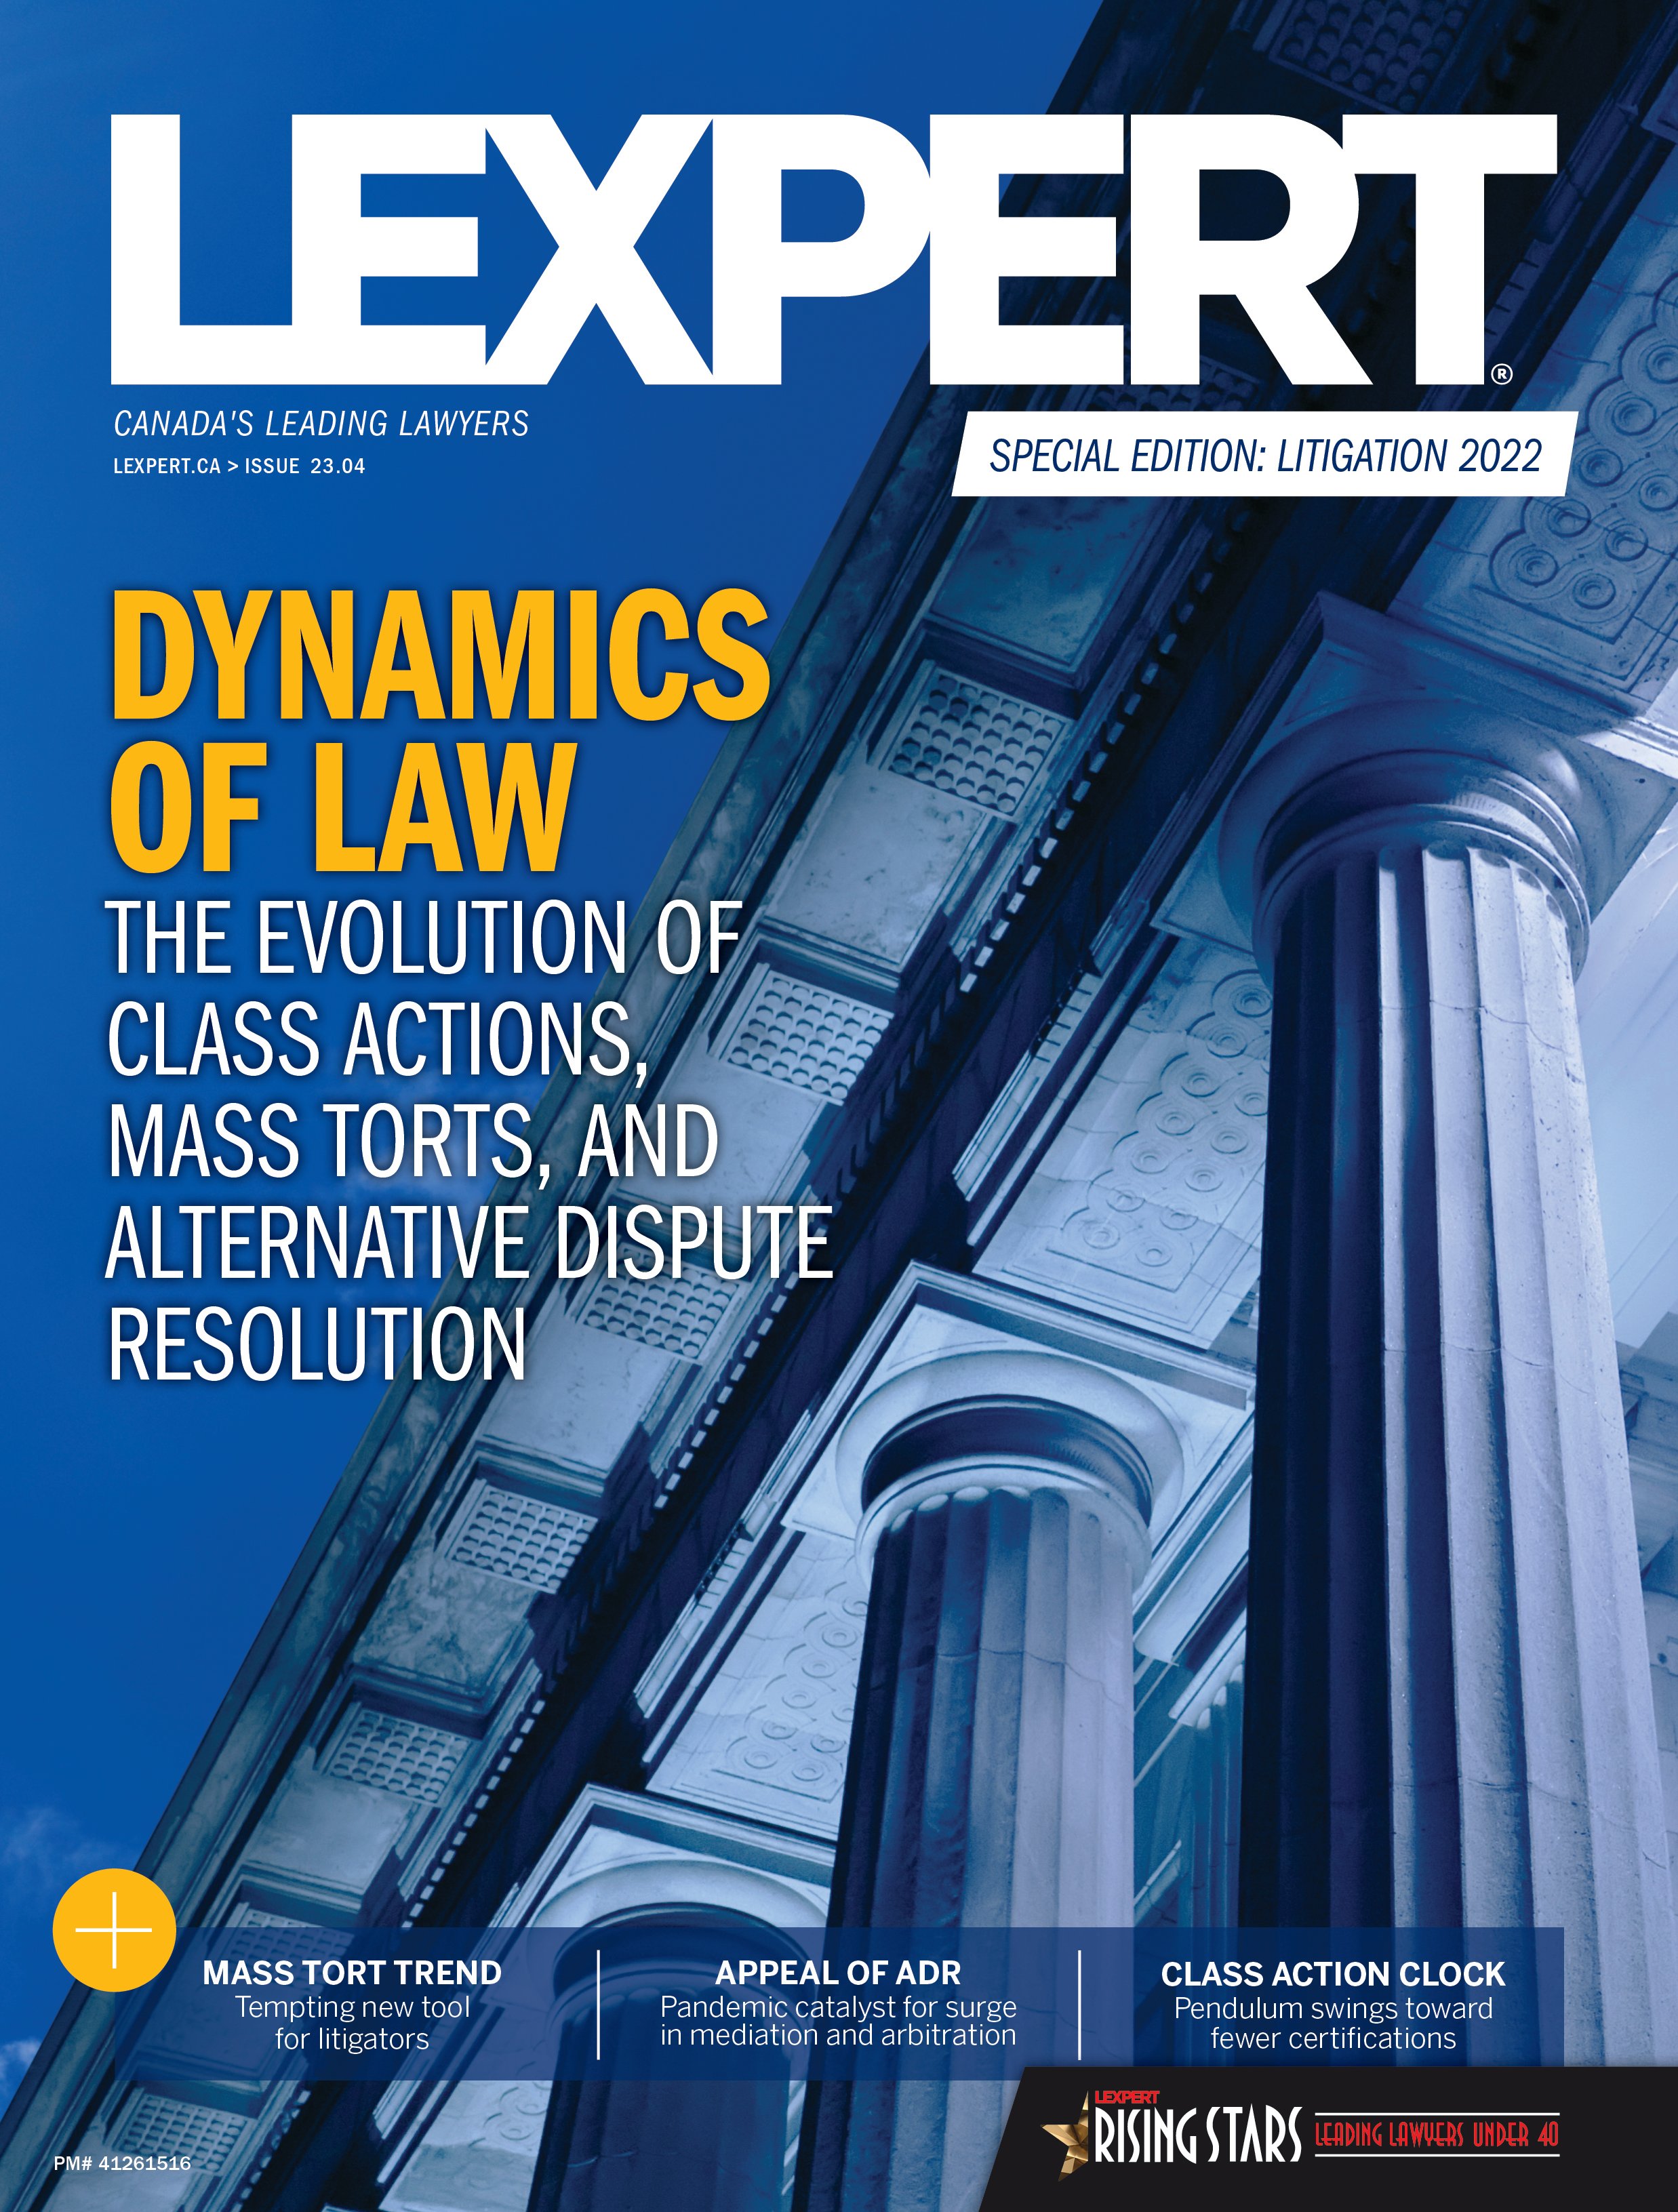 The Lexpert Special Edition: Litigation 2022